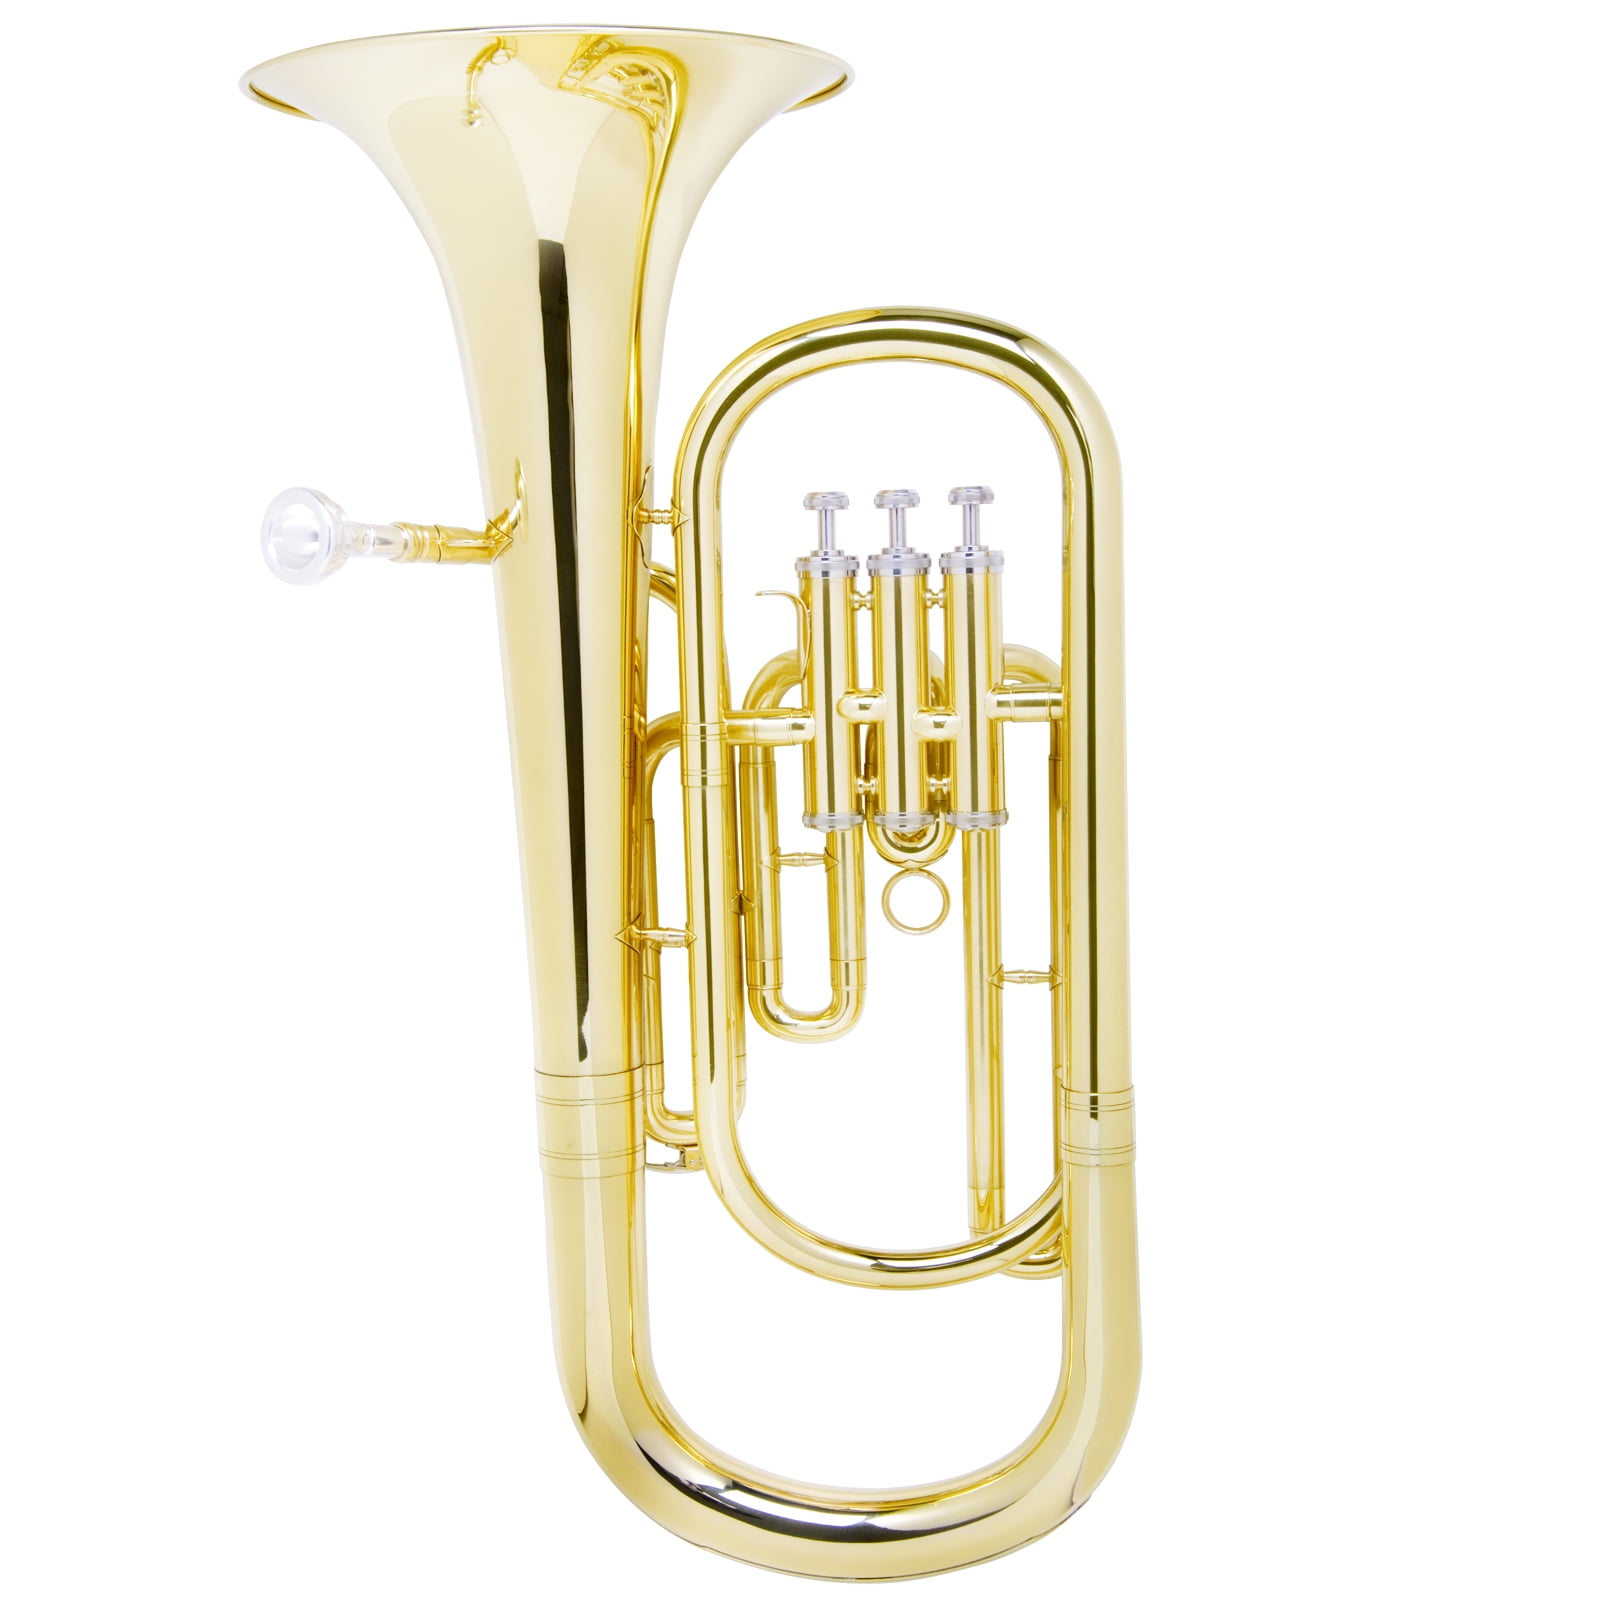 Mendini MBR-20 Bb Baritone with Stainless Steel Pistons, Tuner and Deluxe  Case, Gold